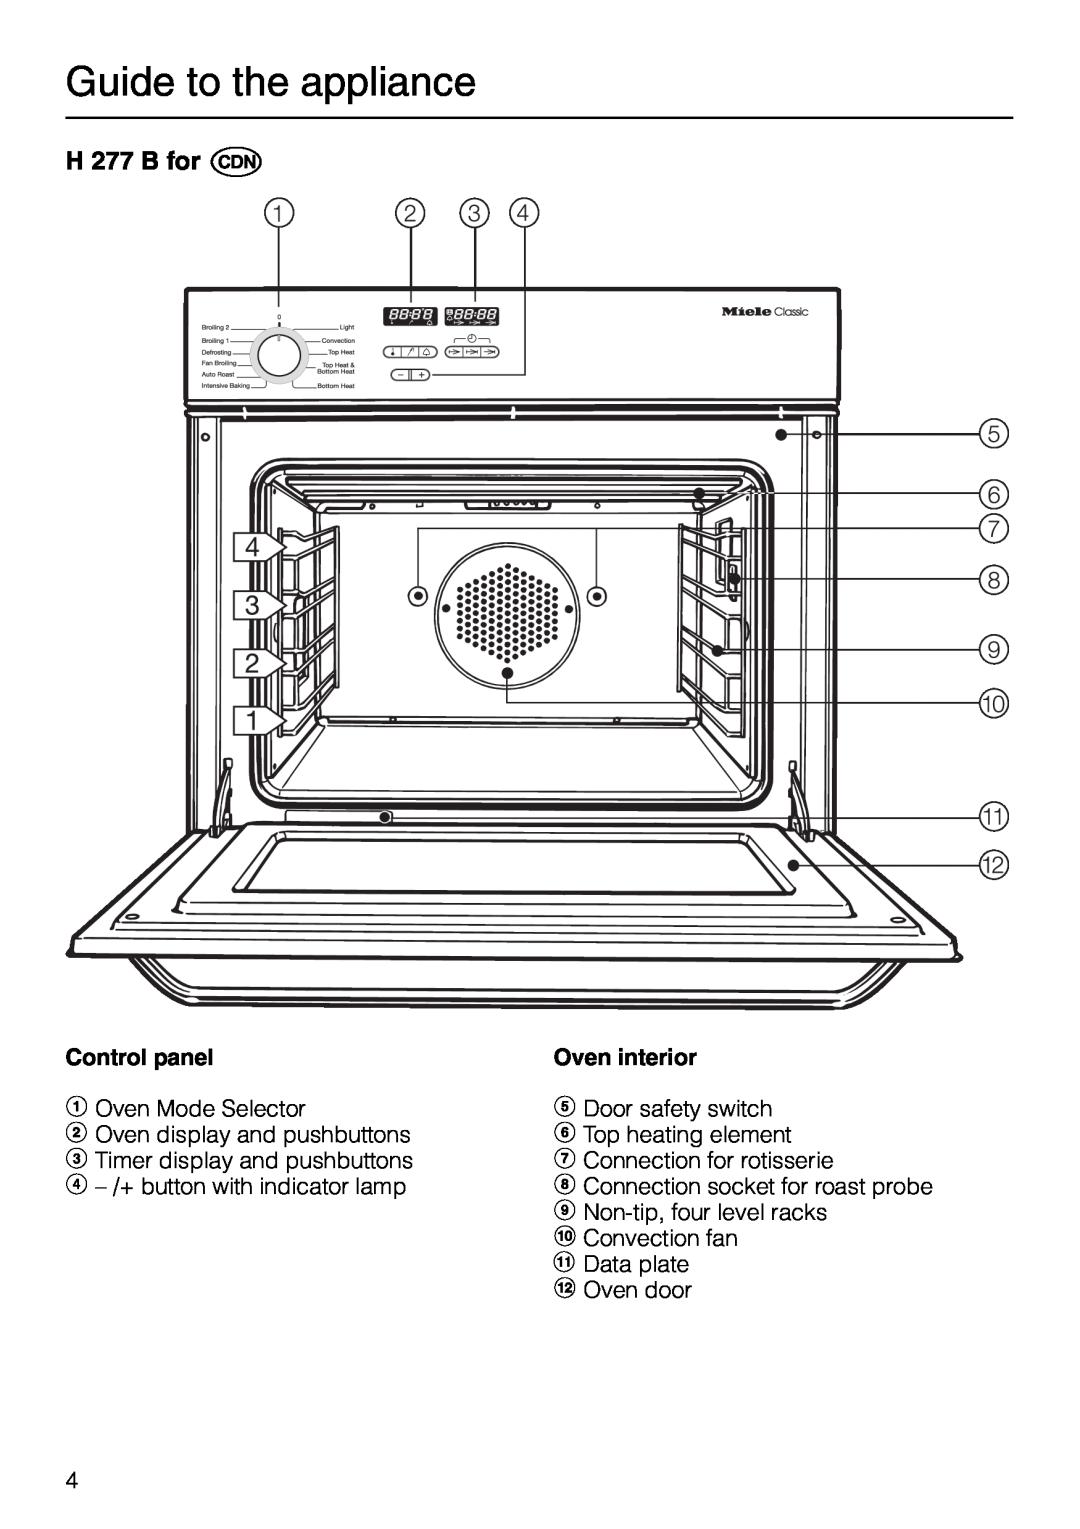 Miele H 267 B manual Guide to the appliance, H 277 B for, Control panel, bOven Mode Selector, Oven interior 